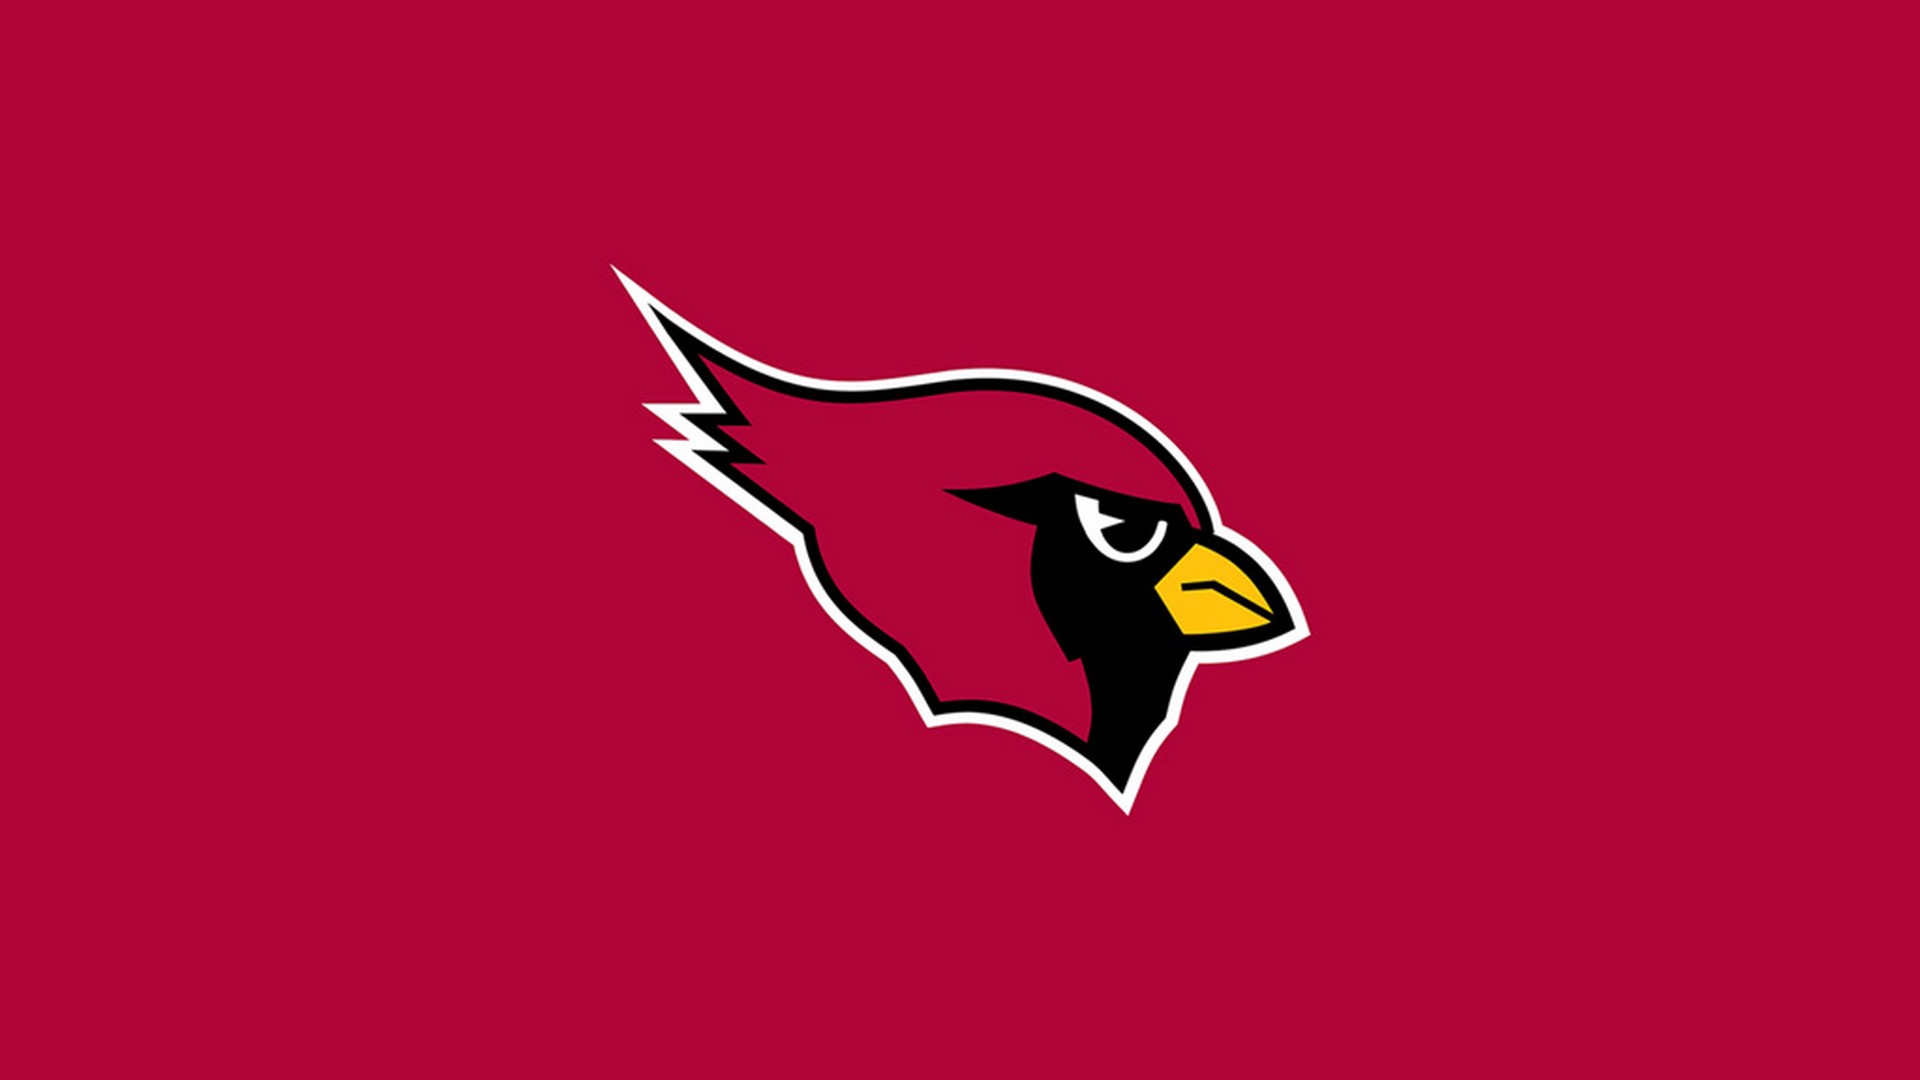 Arizona Cardinals Wallpaper For Mac Backgrounds With Resolution 1920X1080